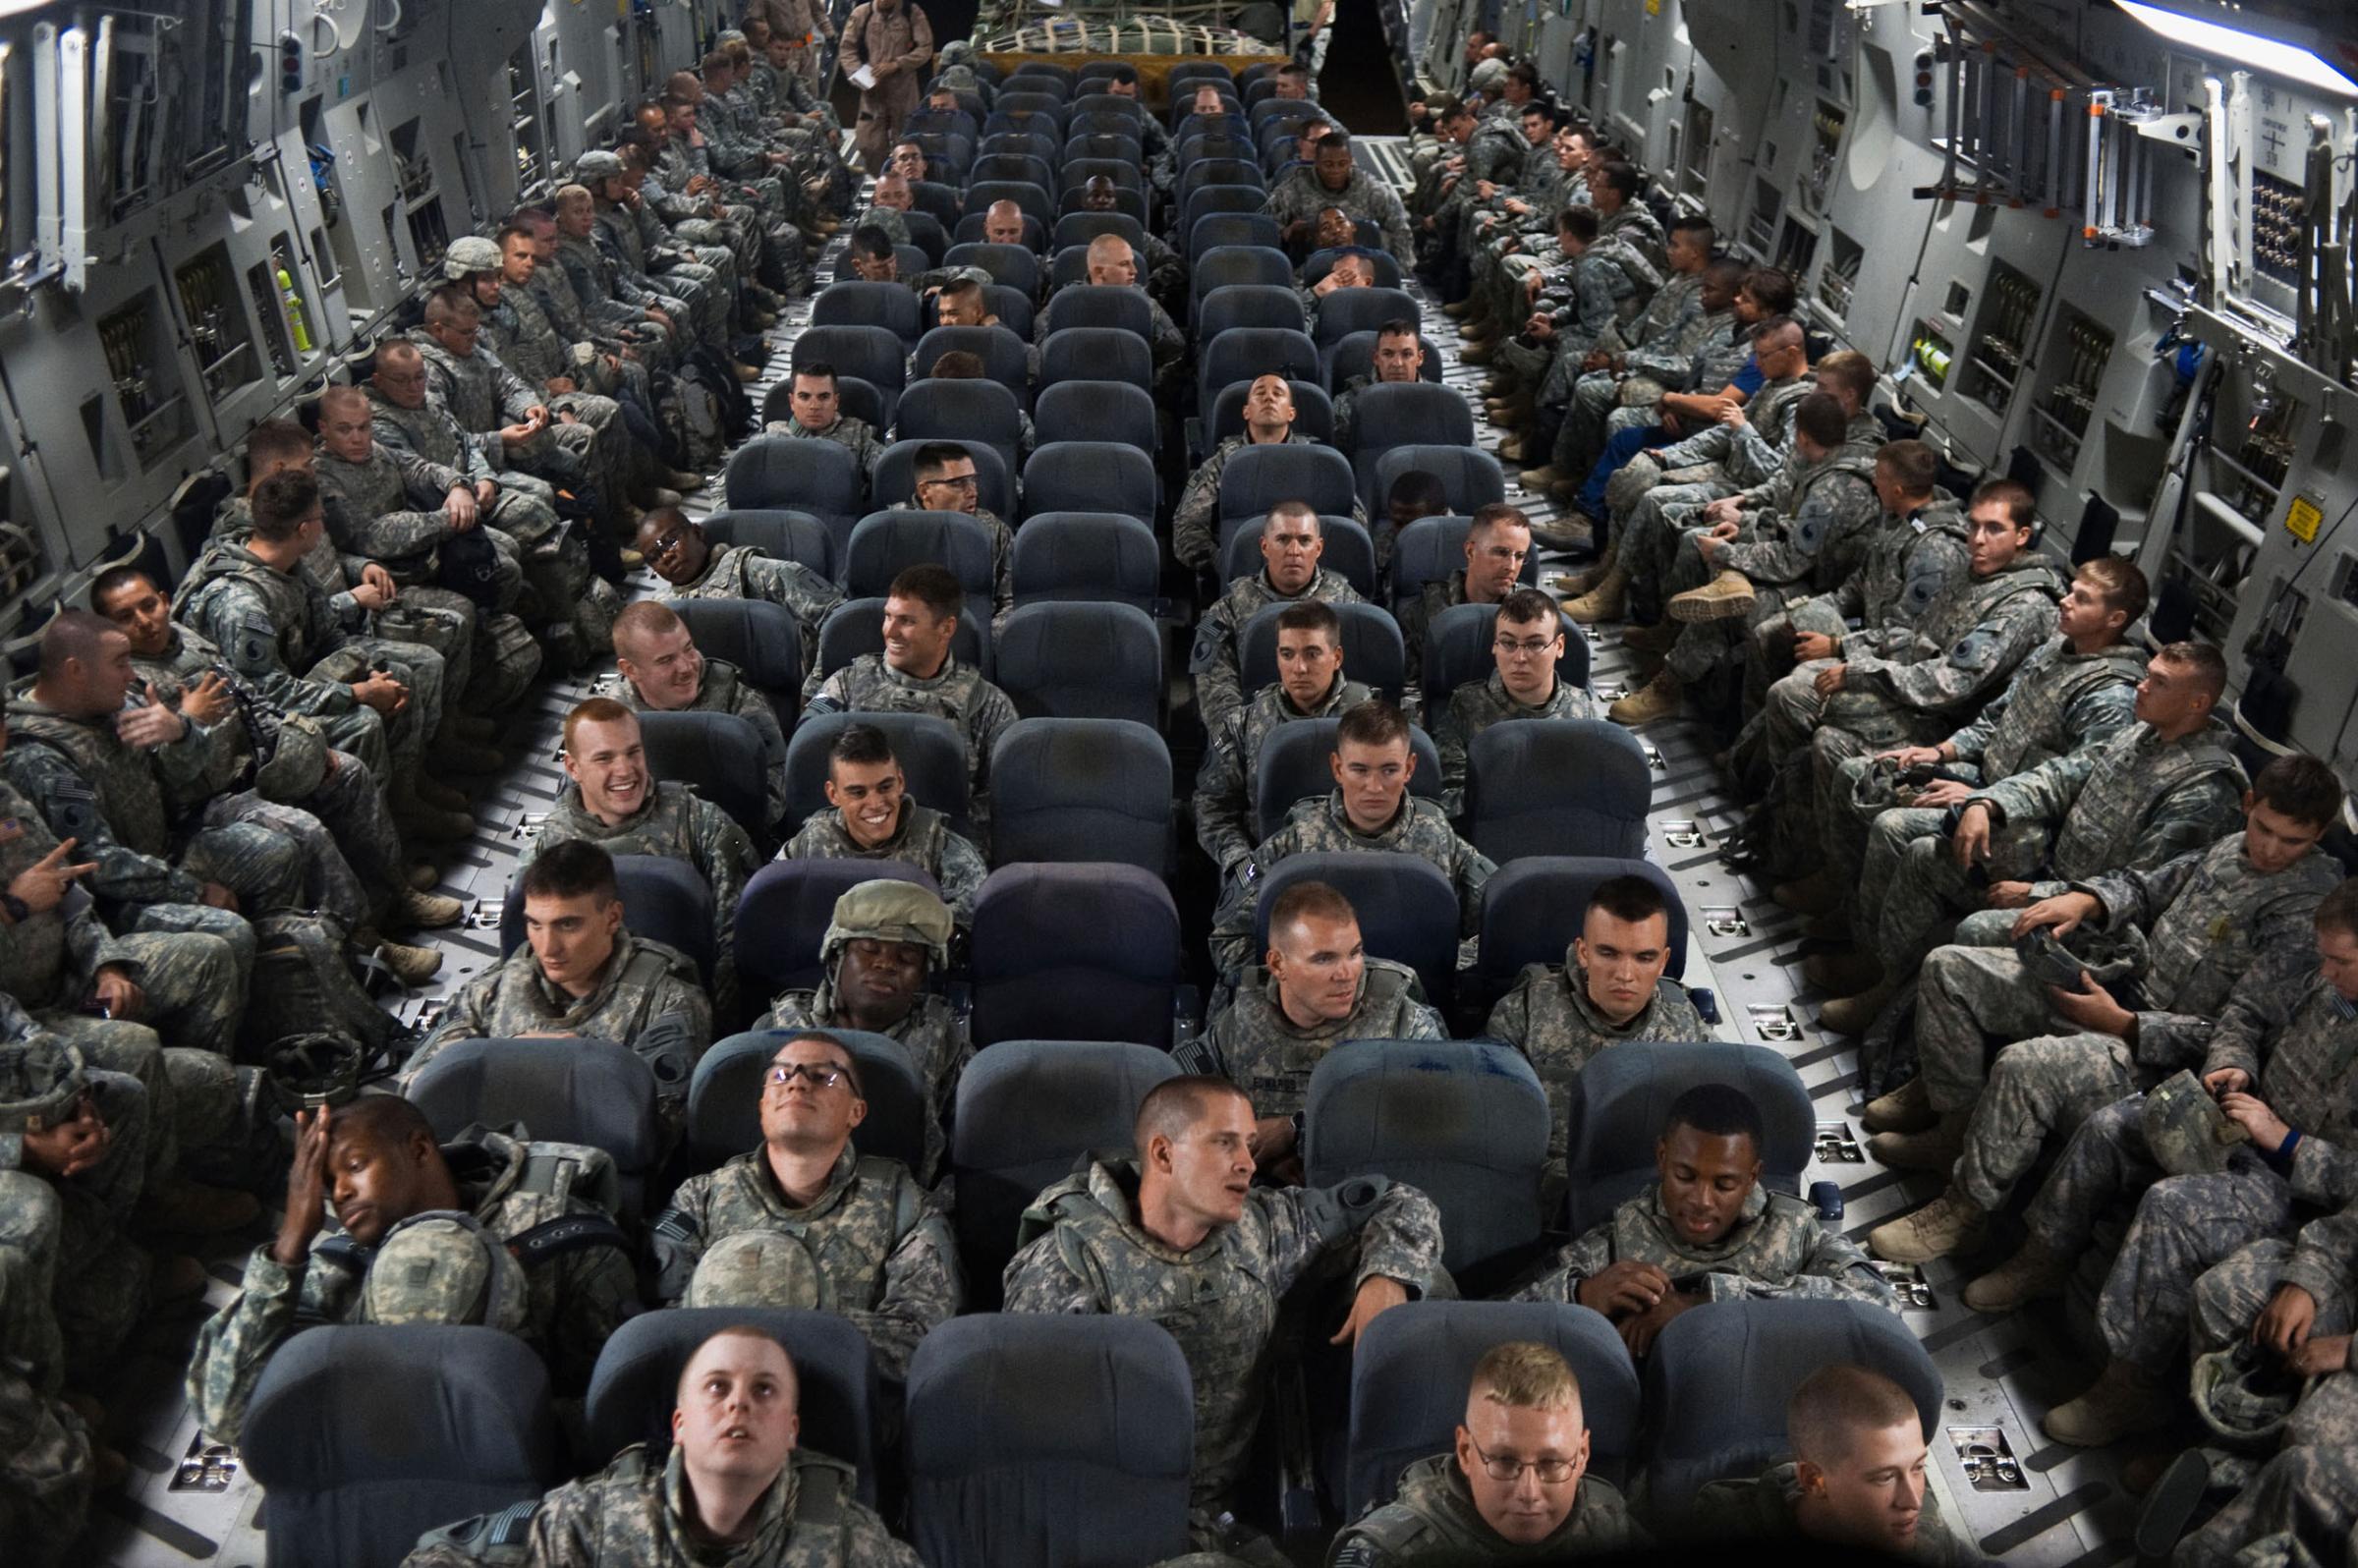 Soldiers from the Virginia National GuardÕs 1st Battalion, 116th Infantry Regiment, head back to the U.S. from Camp Adder, having served eight months, marking the end of the U.S. combat mission in Iraq ends after seven years, Aug. 5, 2010.